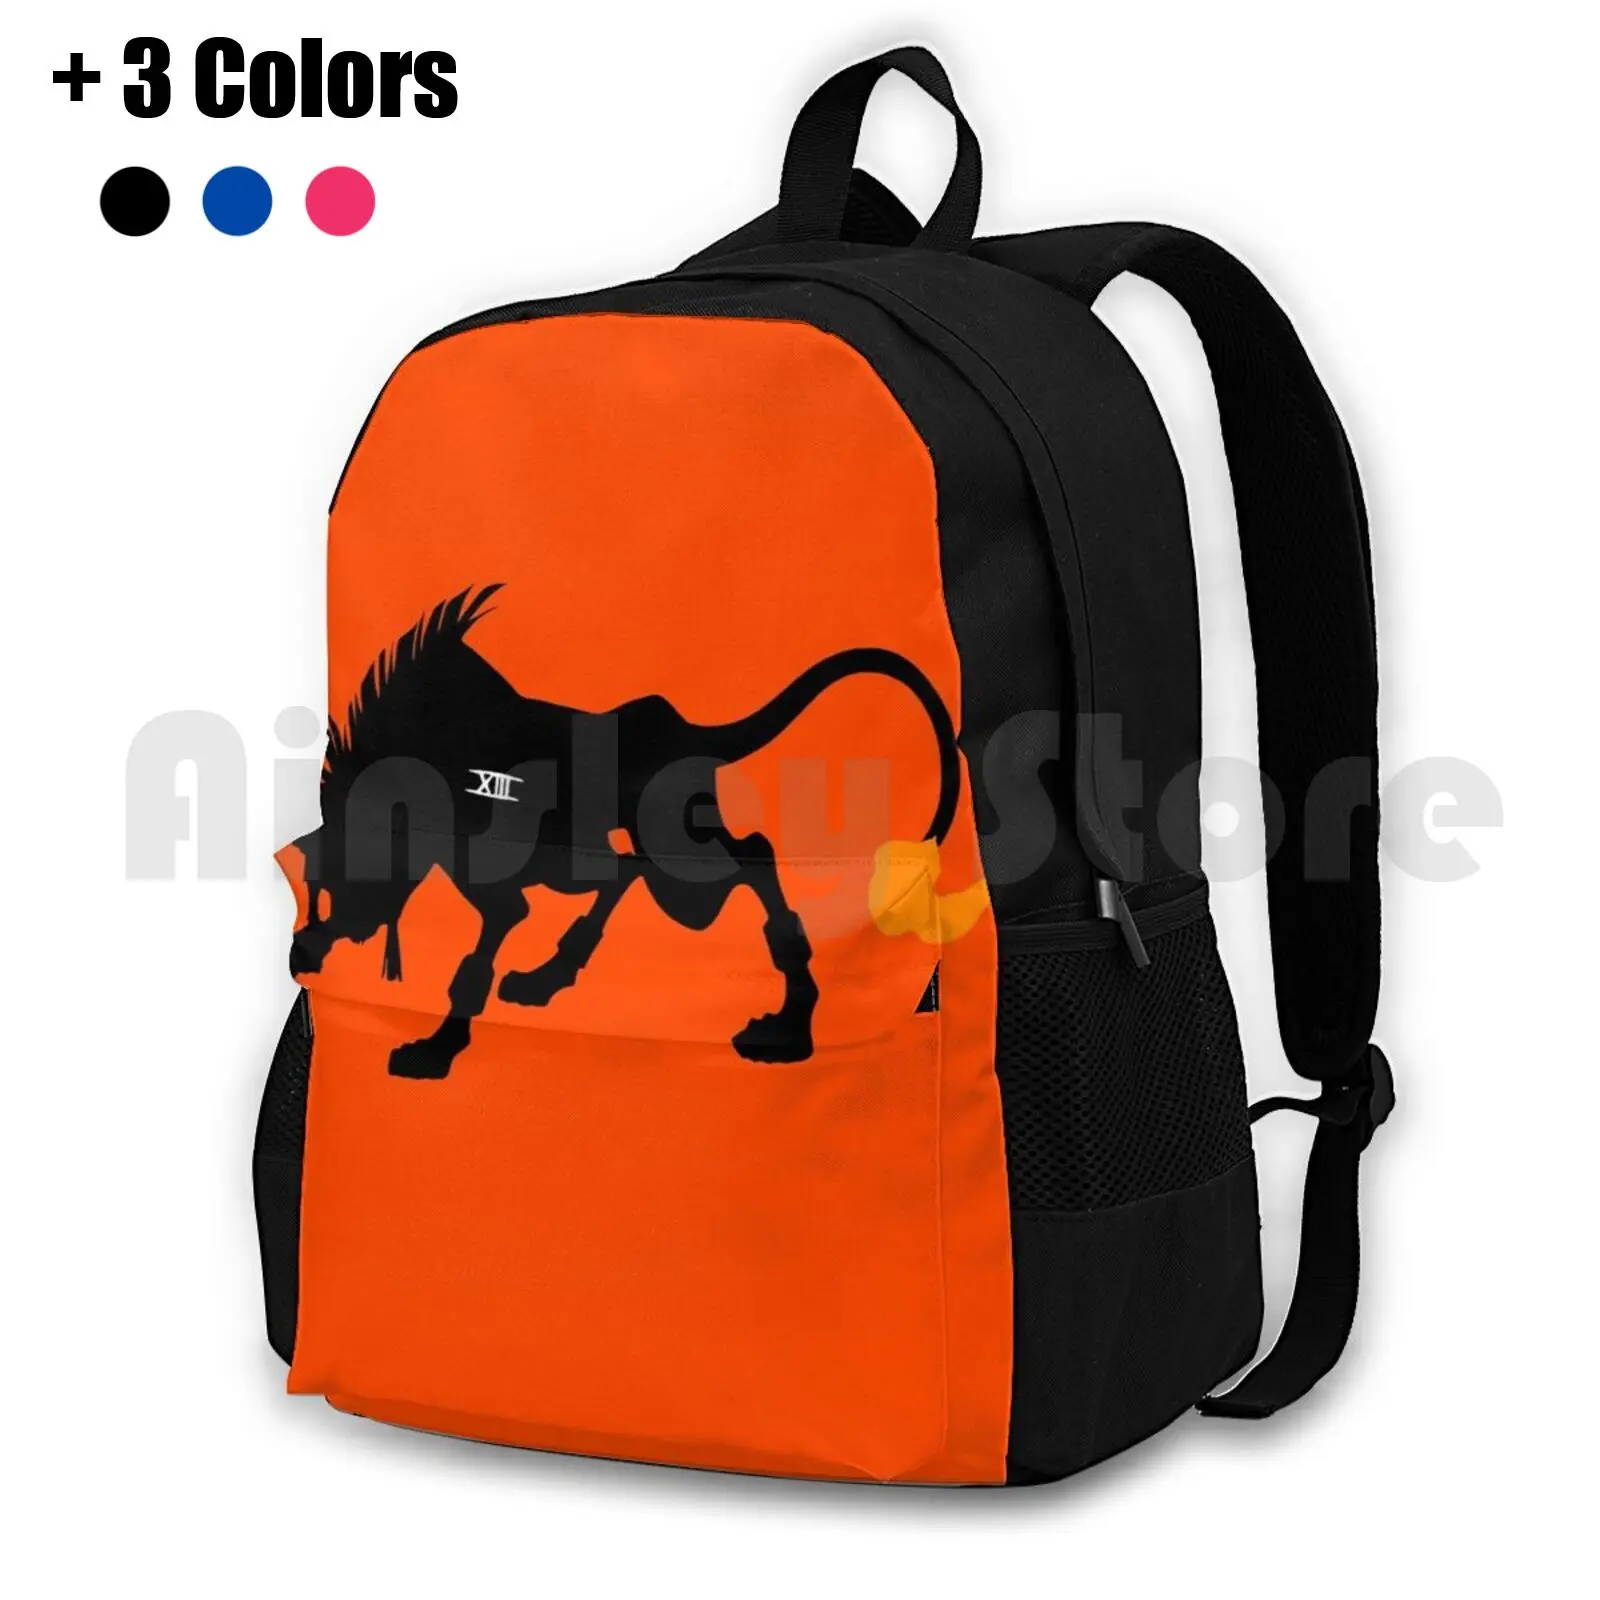 

Final Fantasy Vii-Red Xiii Outdoor Hiking Backpack Waterproof Camping Travel Final Fantasy Vii 7 Squaresoft Square Square Enix